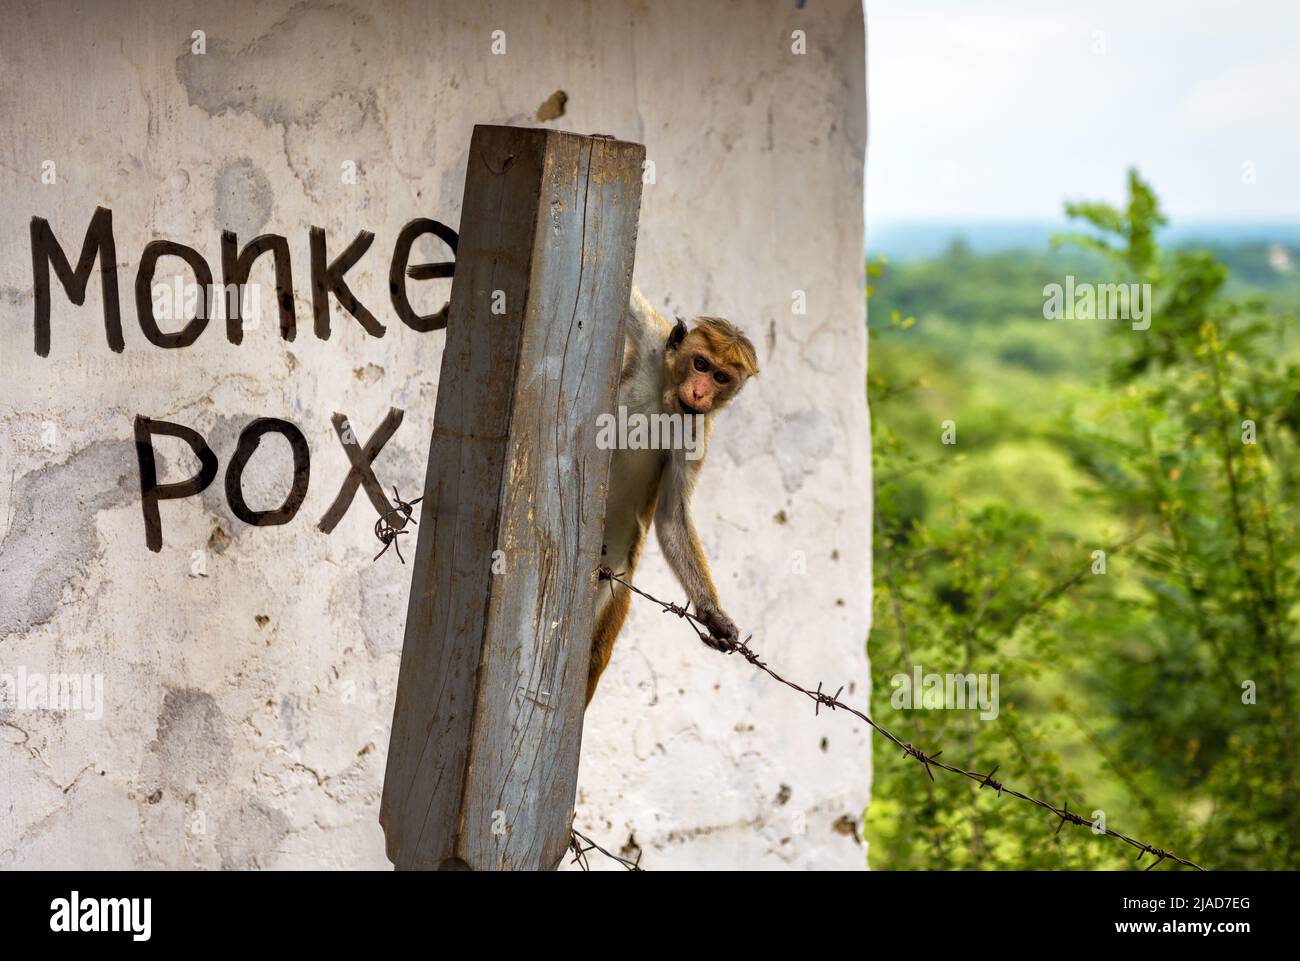 Monkey is against old stone wall with painted word Monkeypox in restricted area. Monkey pox virus, dangerous disease spreads in world. Concept of smal Stock Photo